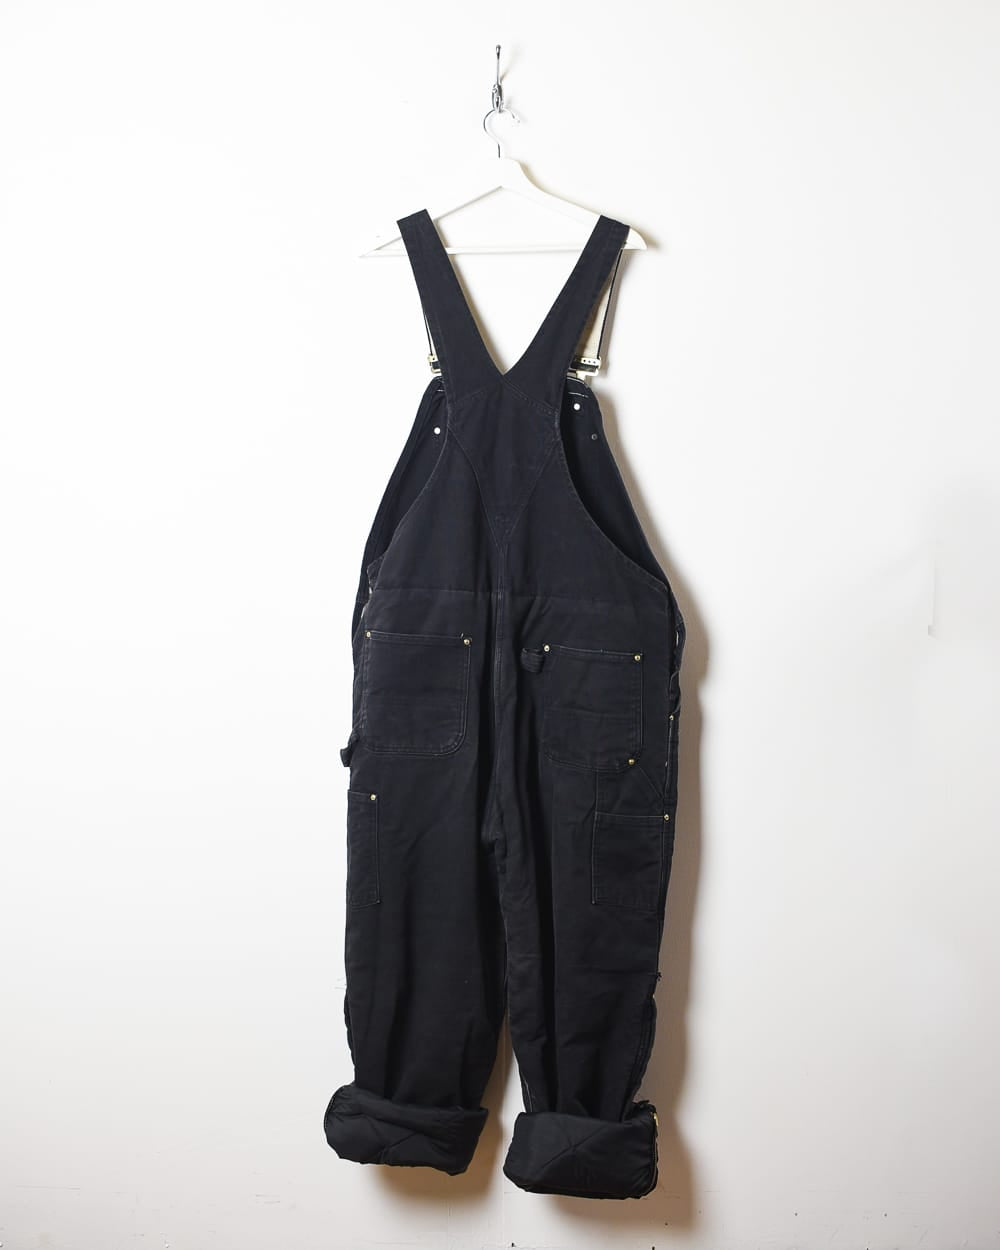 Black Carhartt Quilted Double Knee Carpenter Dungarees - X-Large